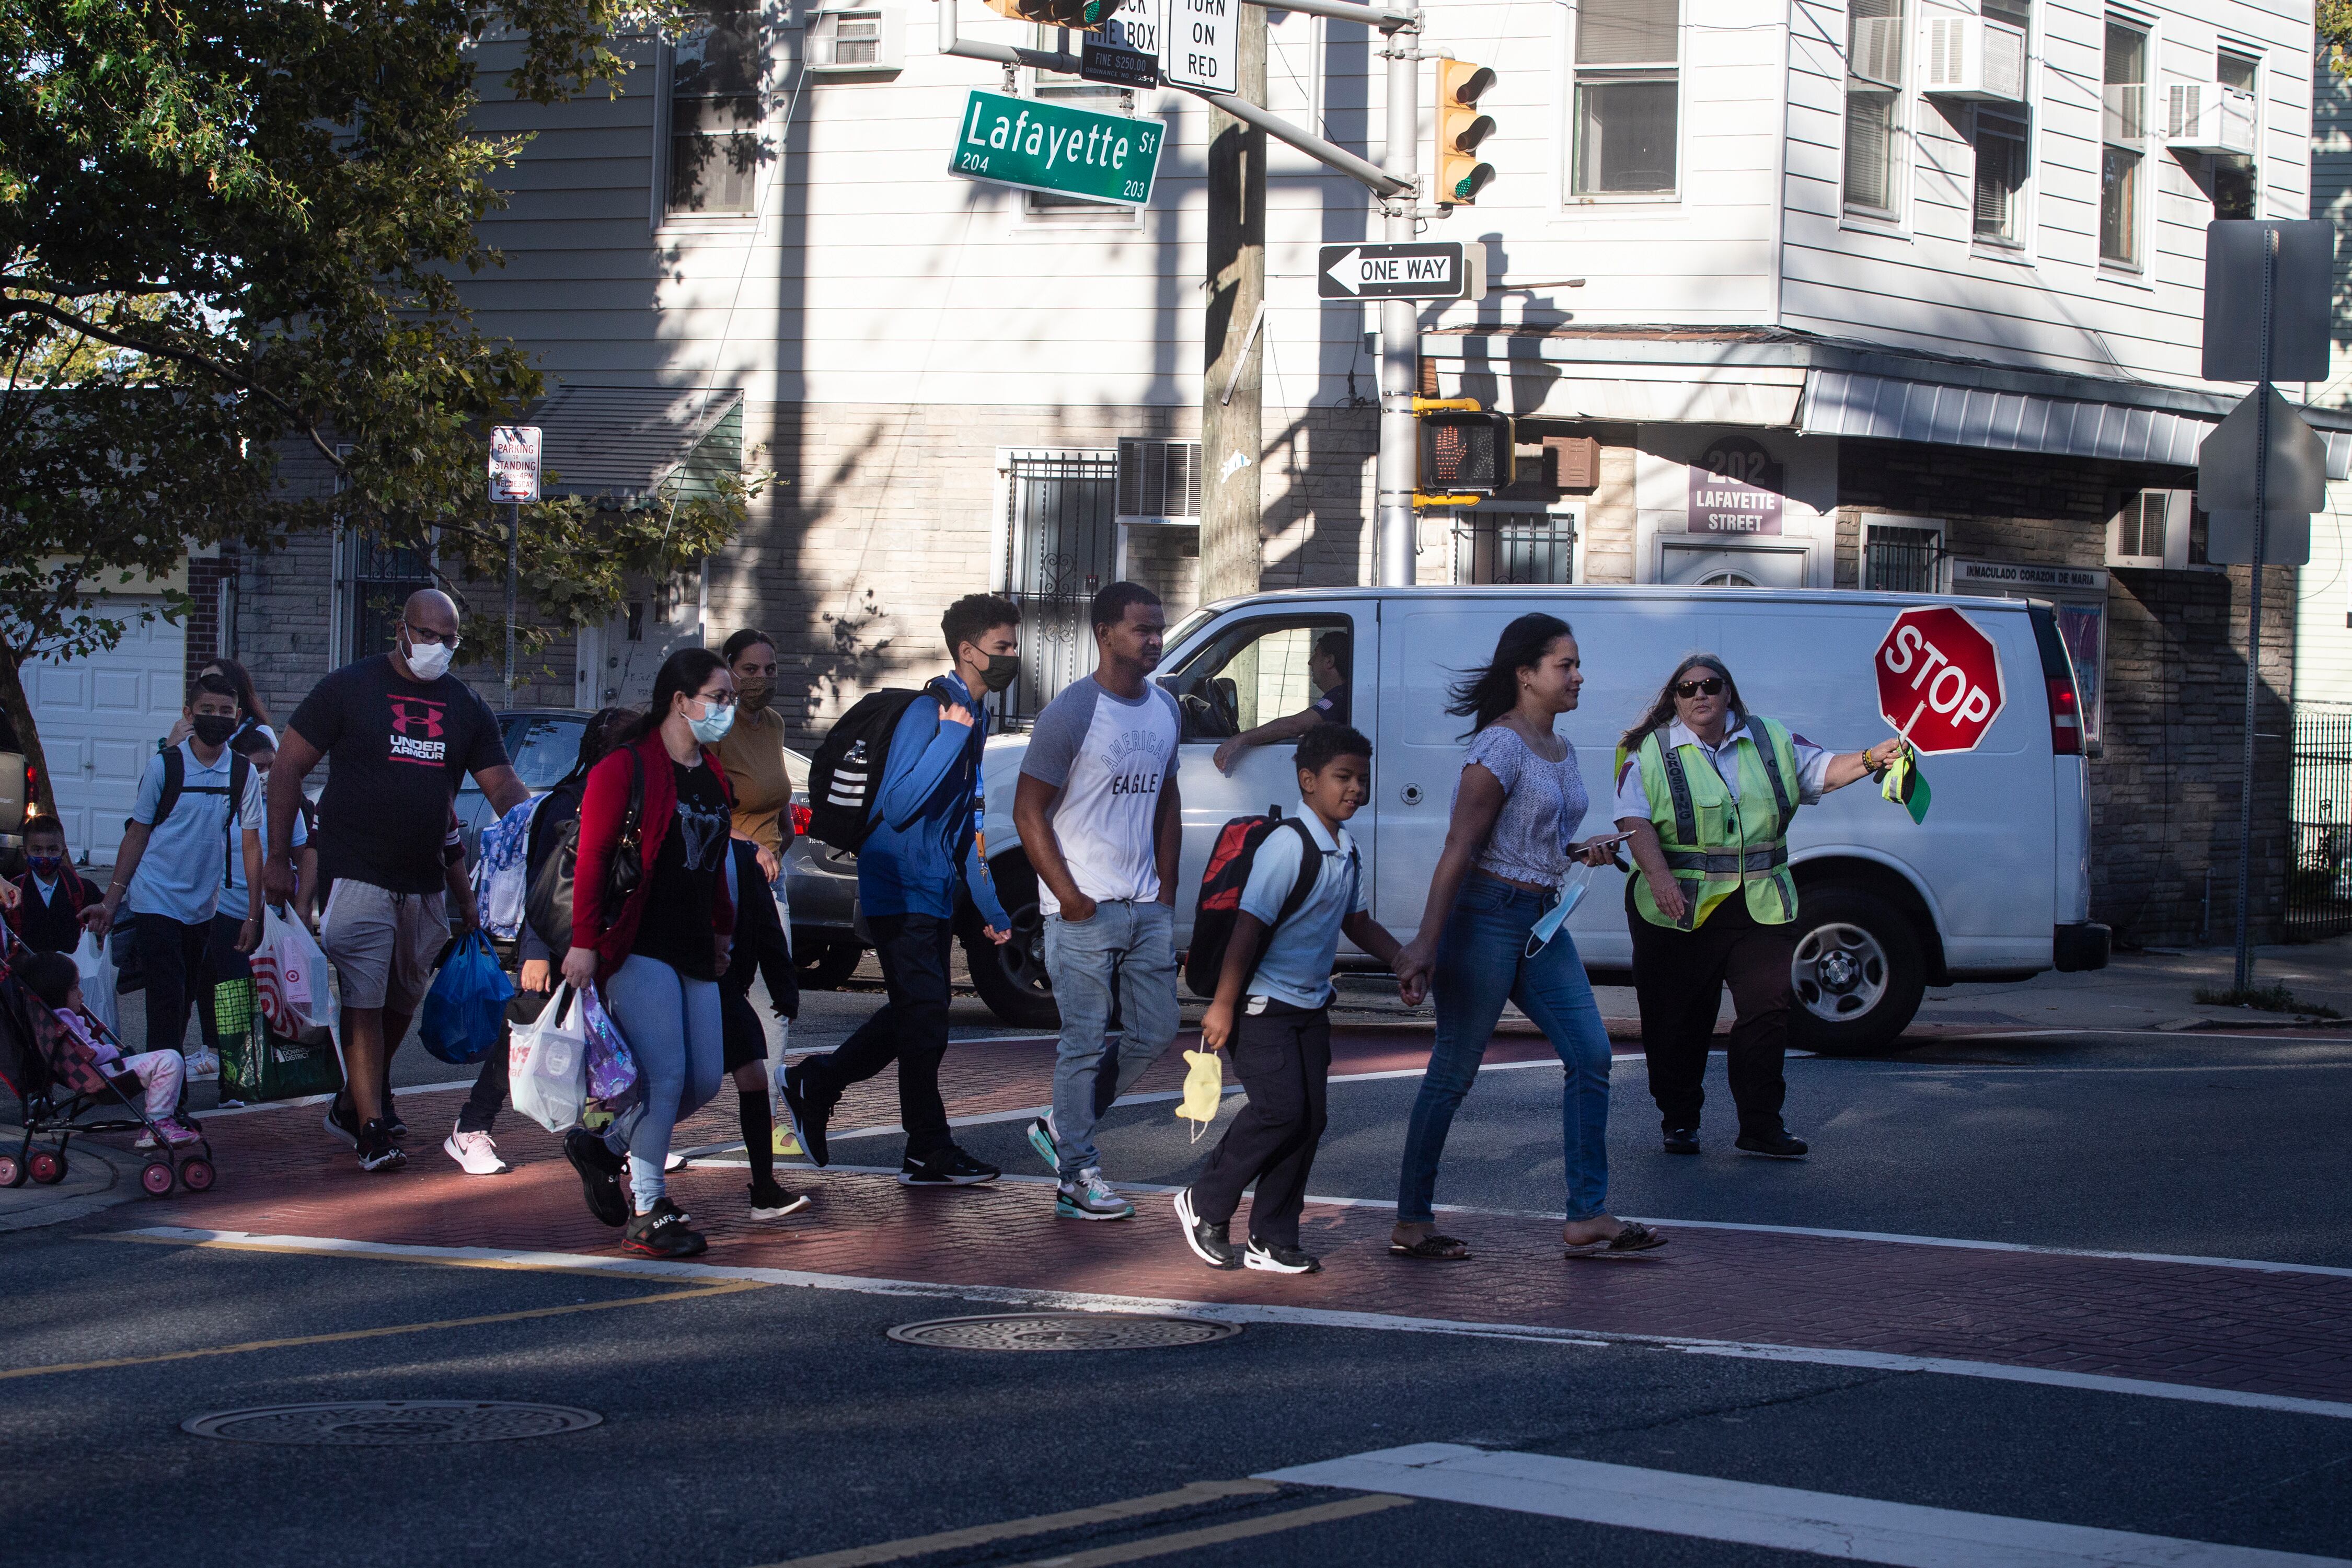 Students wearing backpacks and uniforms cross the street as a crossing guard holds a red stop sign to cars on the street.